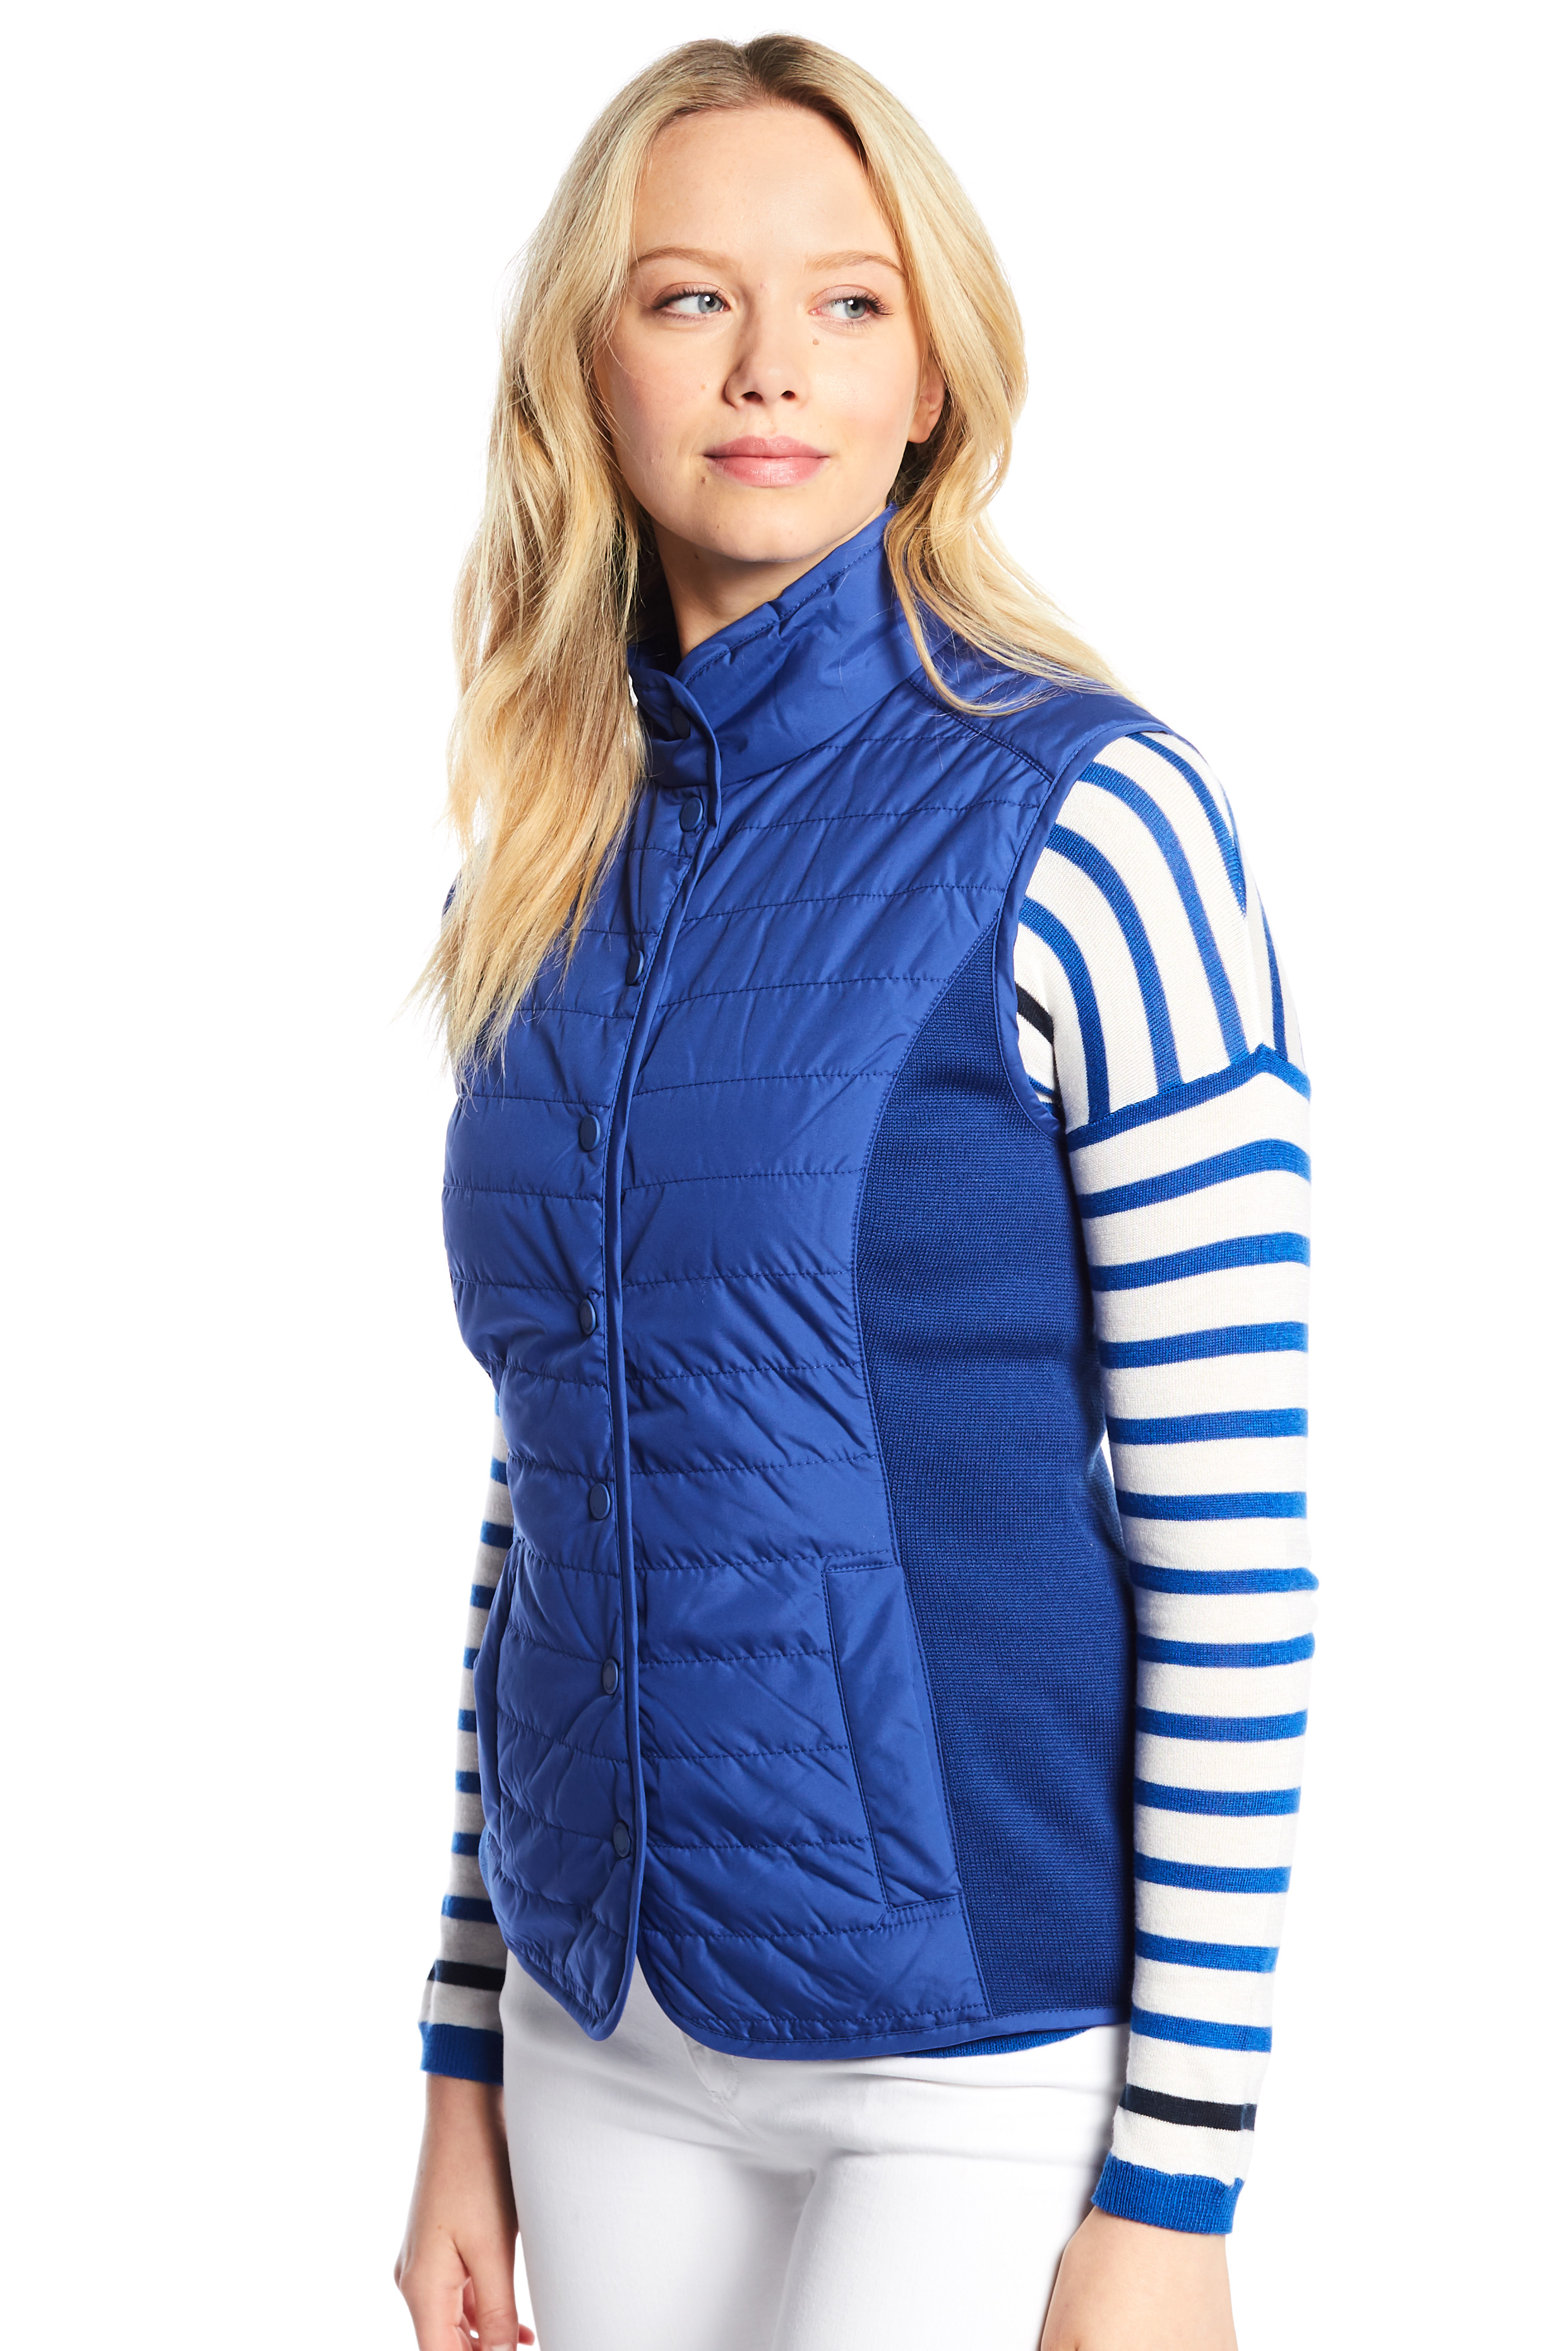 Dubarry Bayview Gilet for Her